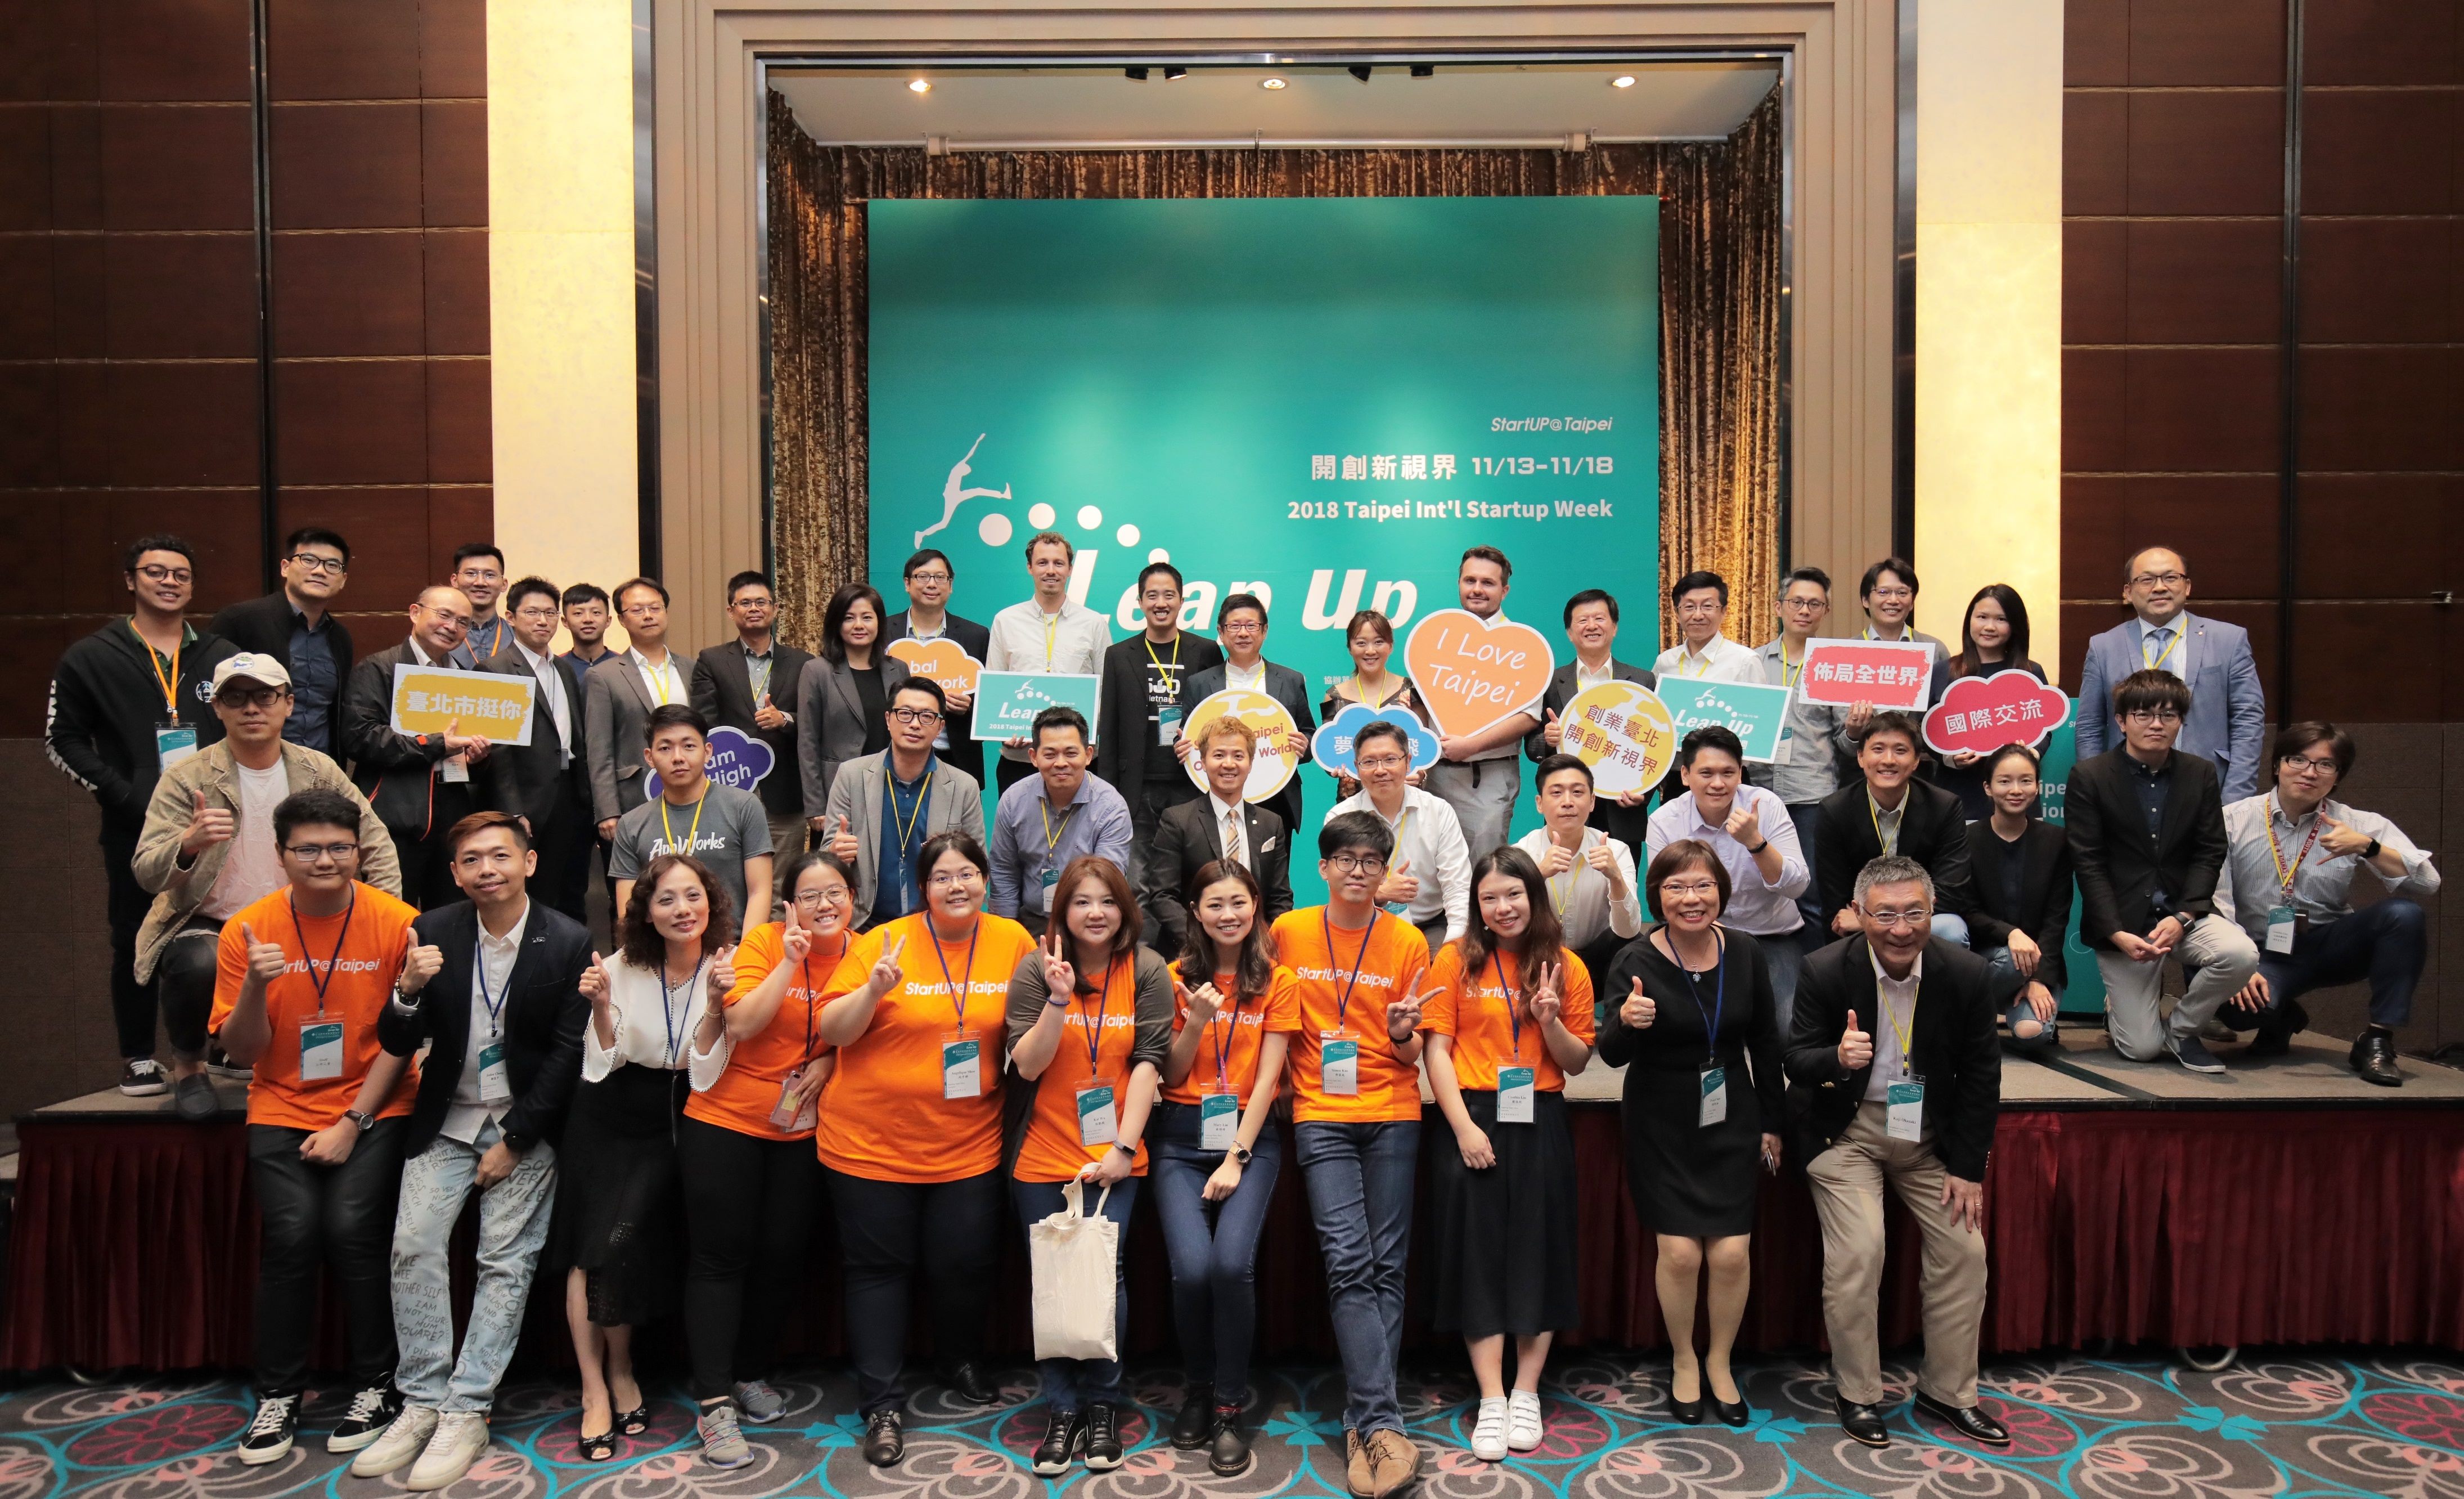 Representatives of domestic and international venture capital, business matching, and accelerator units were invited to participate in the StartUP@Taipei Demo Day. Data source: Department of Economic Development, Taipei City Government